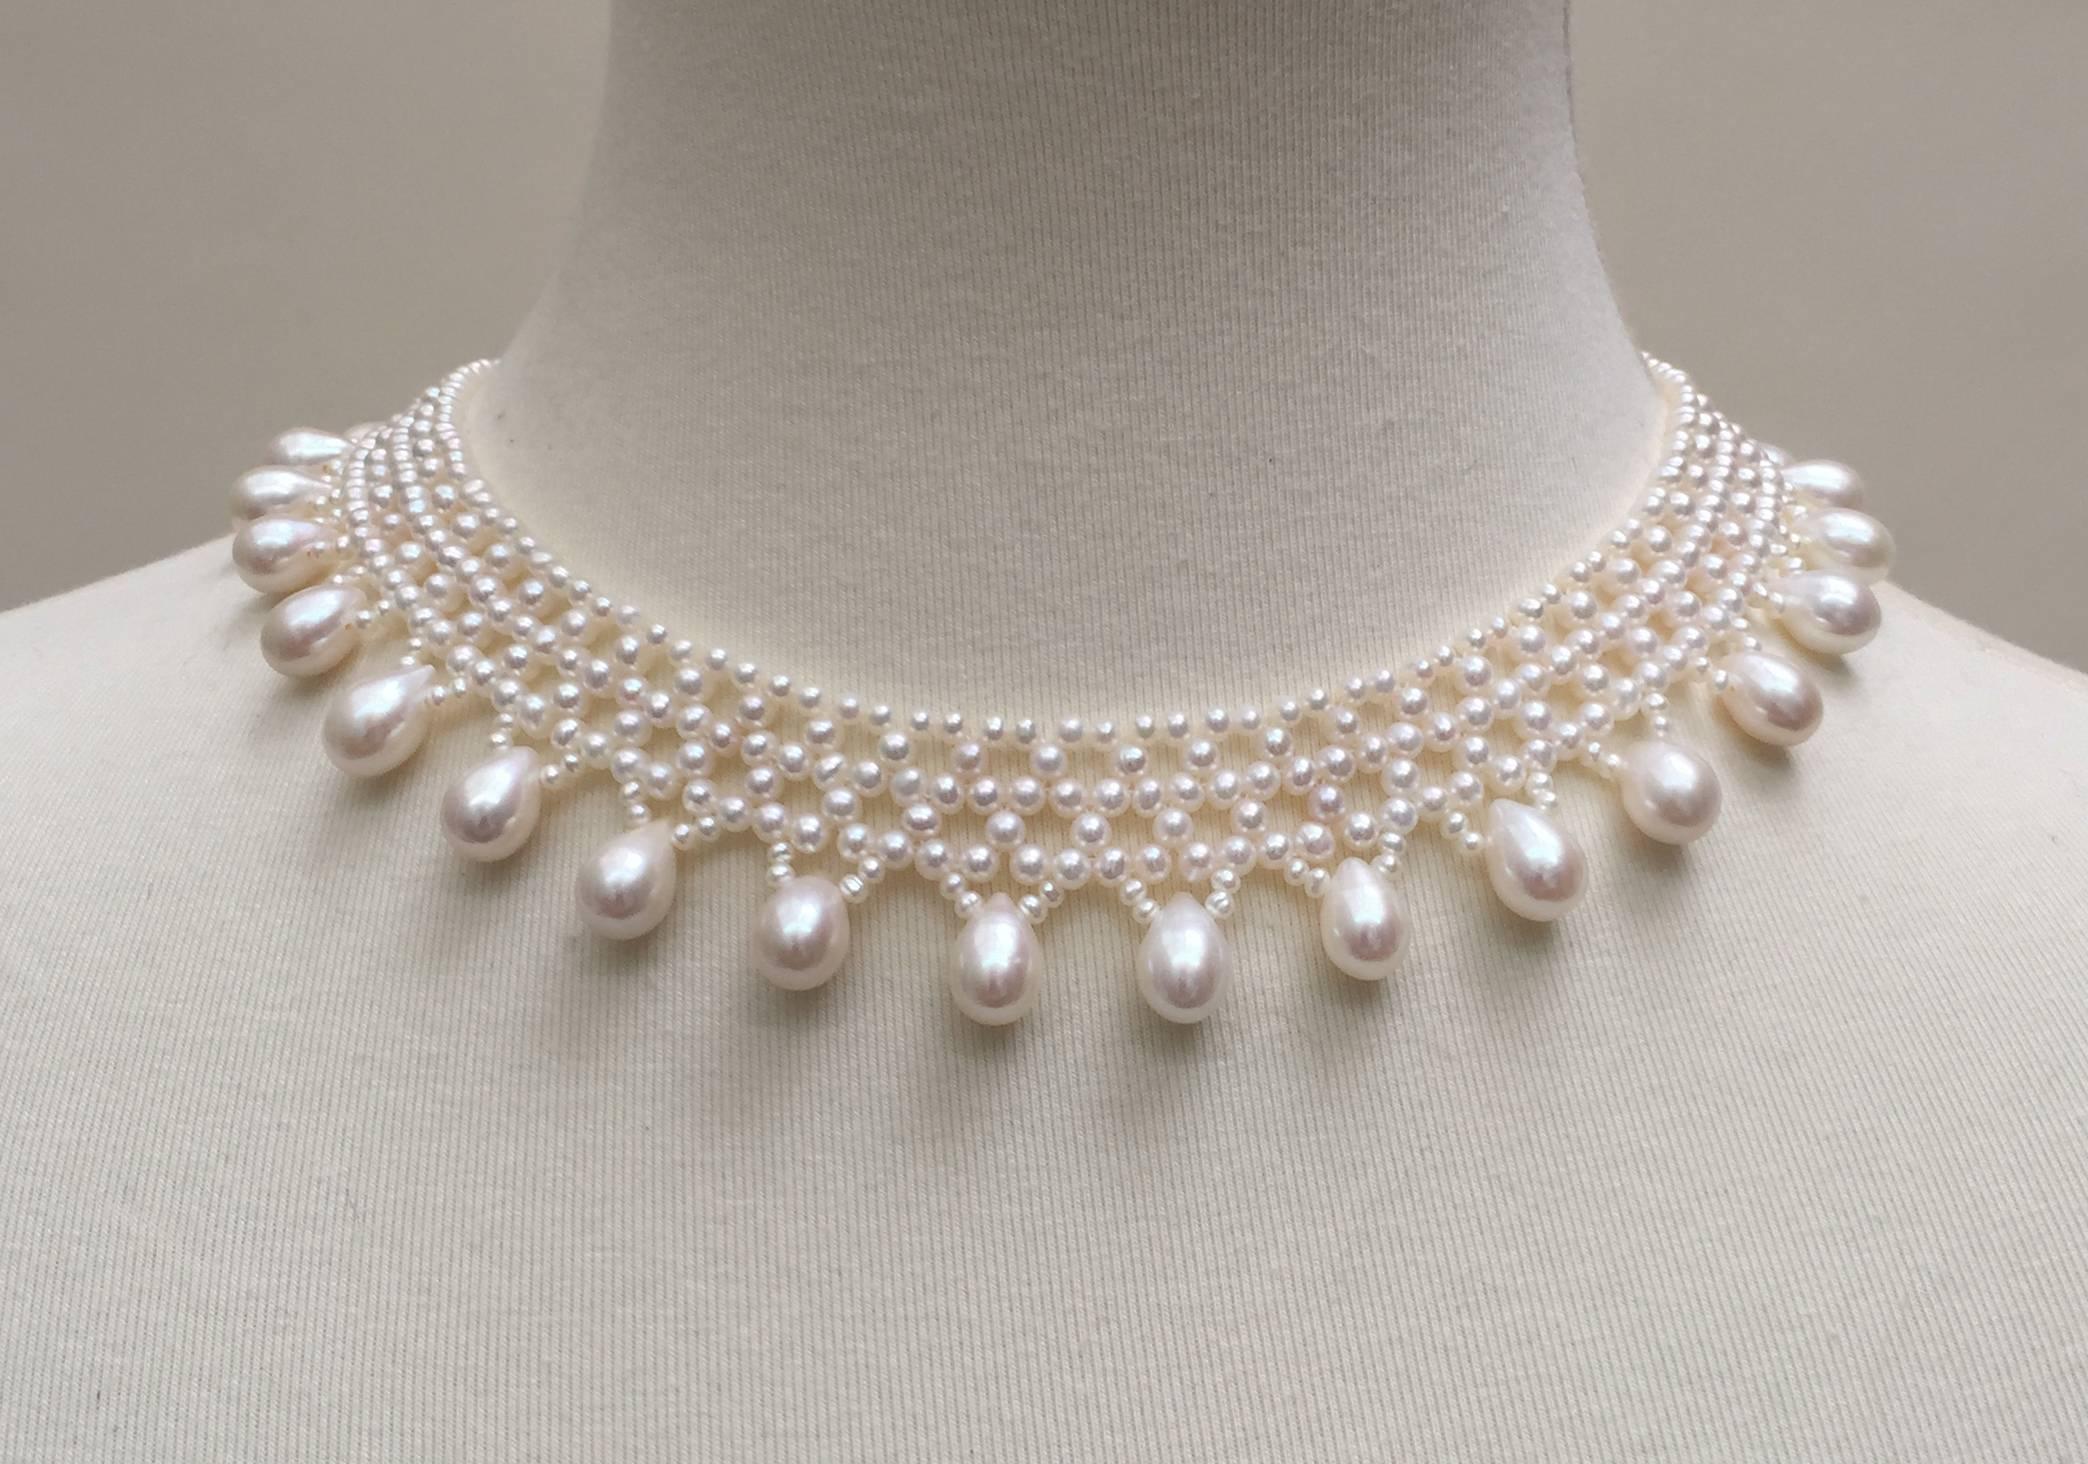 Bead   Marina J  Woven Pearl Necklace with Pear-Shaped Pearl Drops and sliding clasp